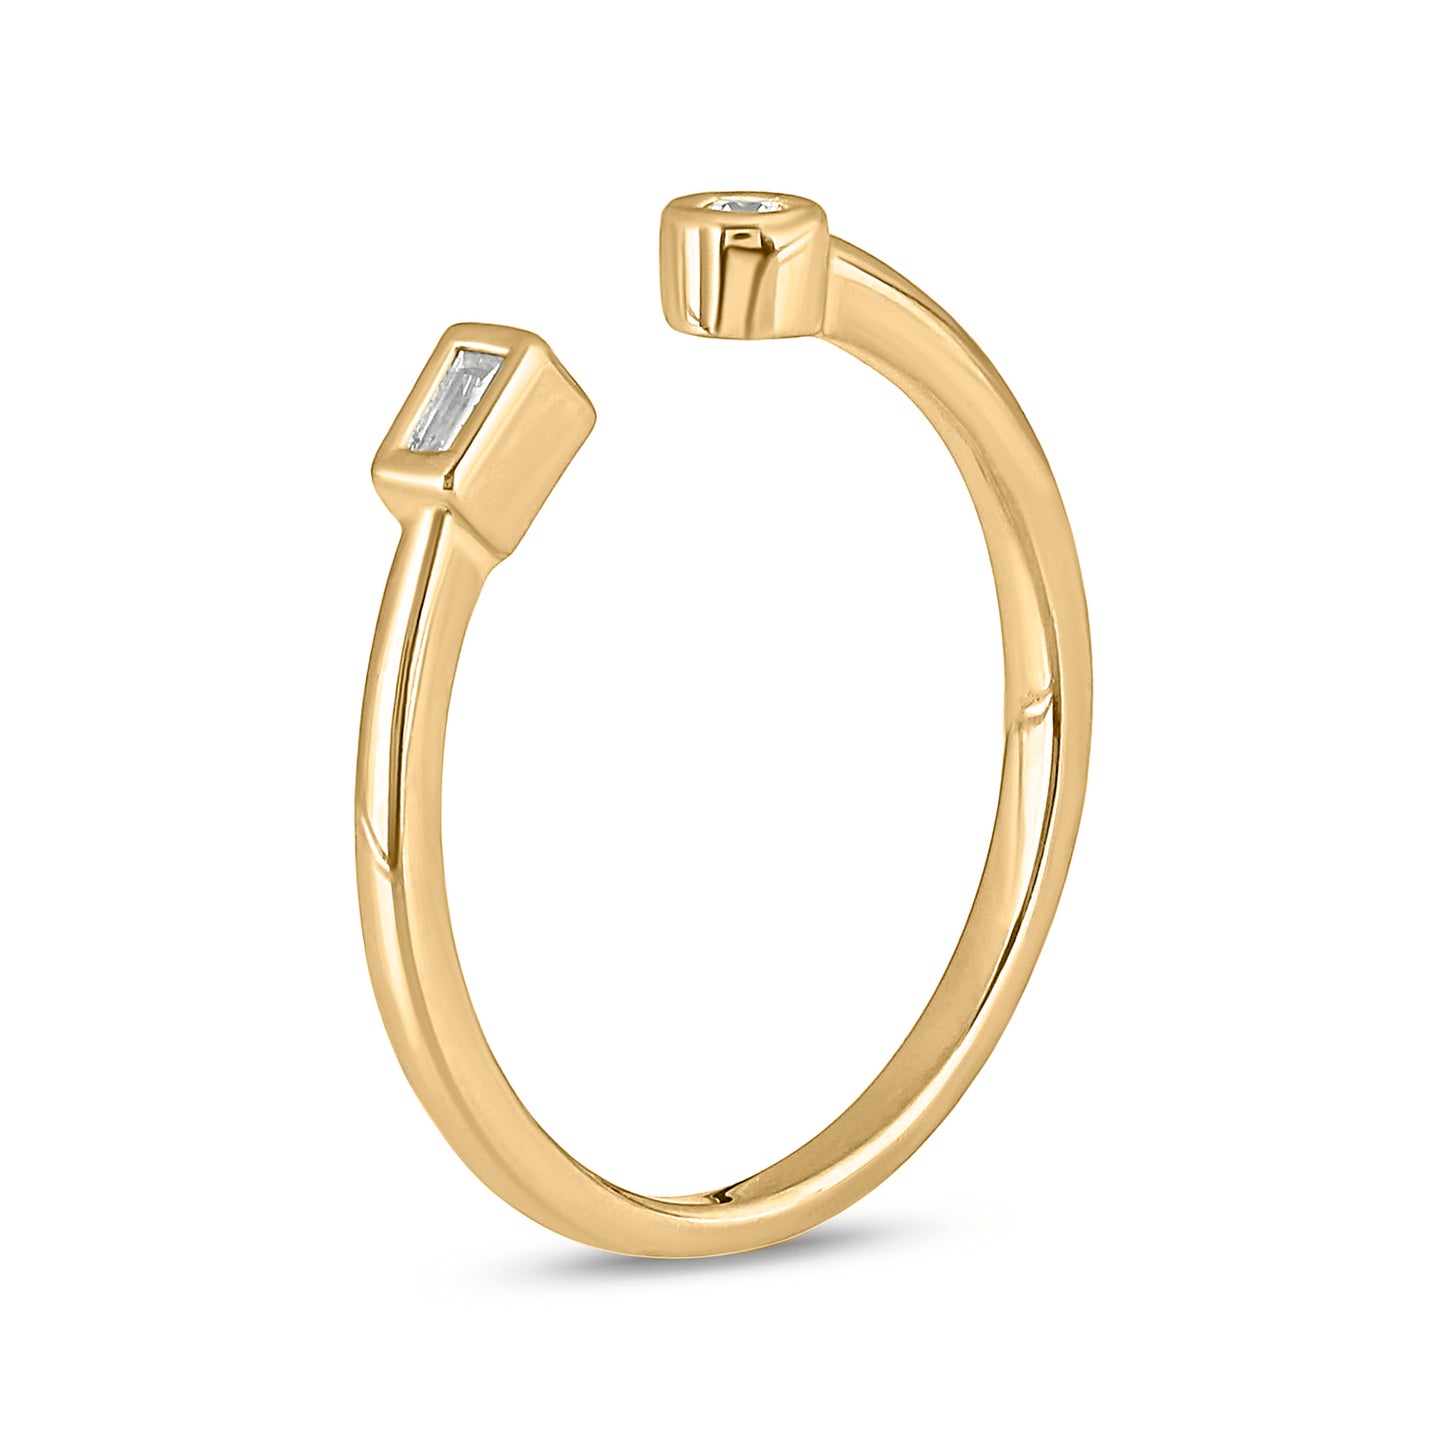 10KT Gold Round & Baguette Diamond Fashion Open Ring